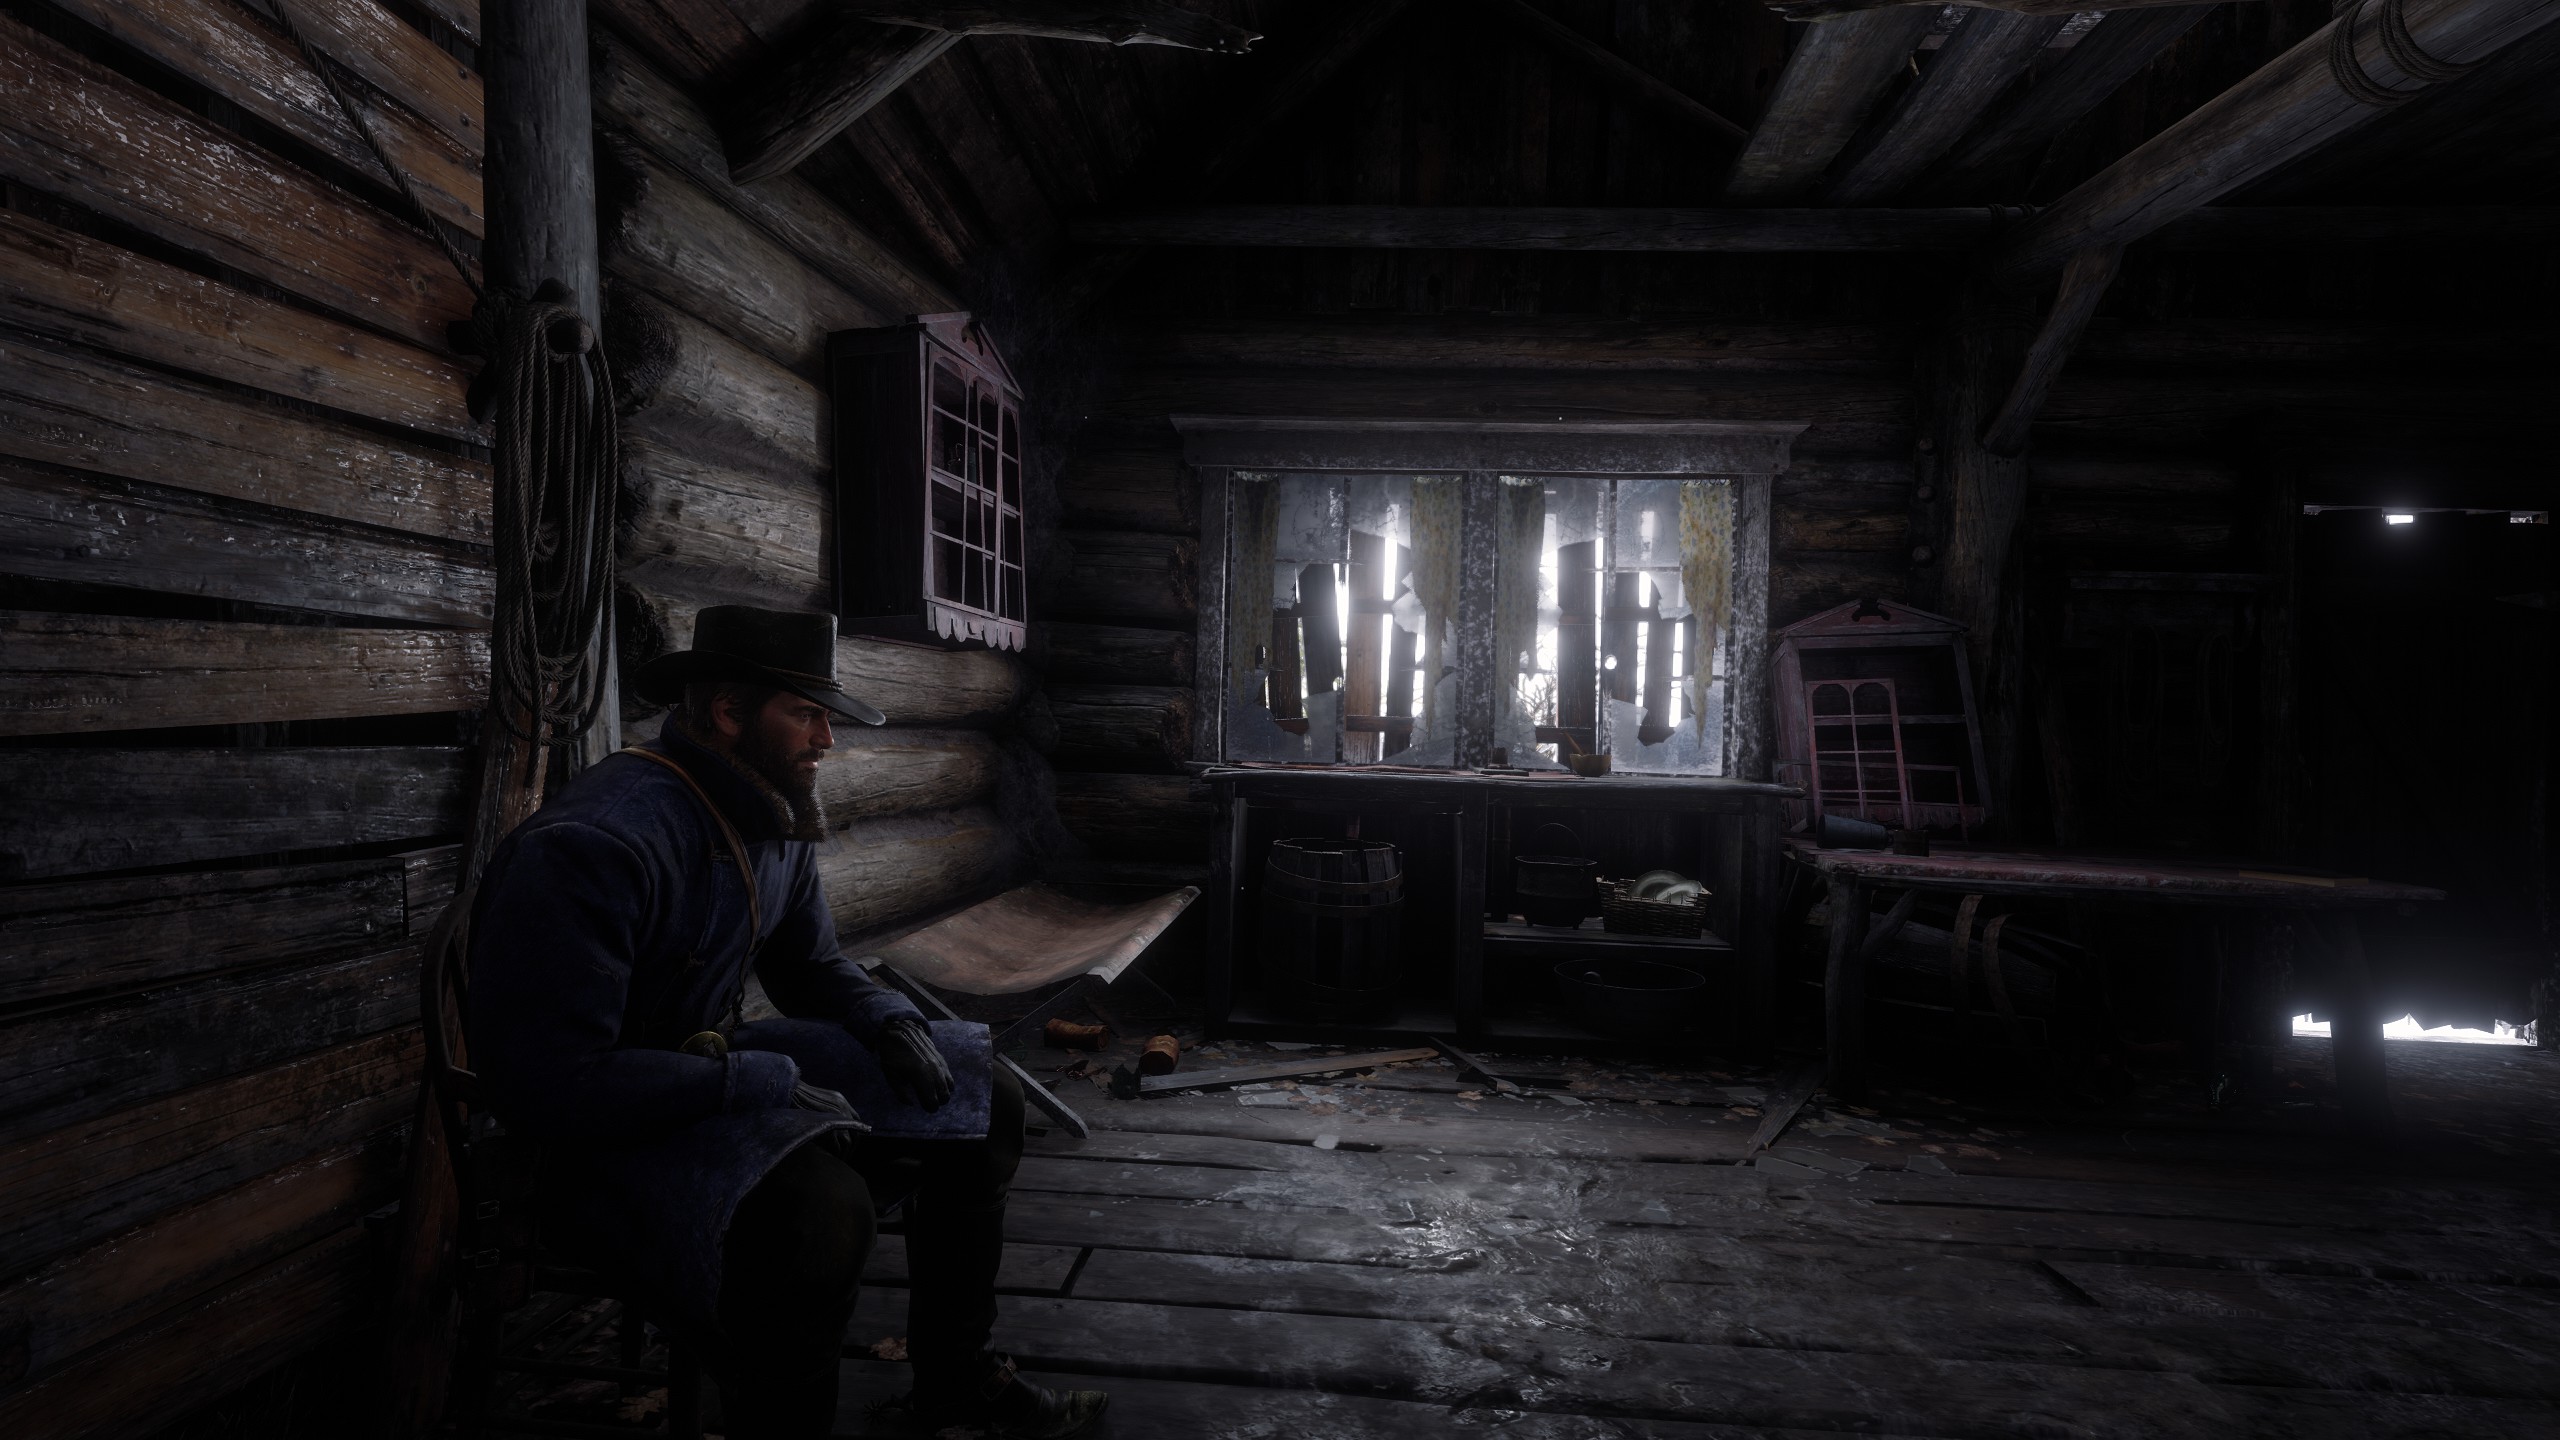 General 2560x1440 Red Dead Redemption 2 video game characters CGI sitting Rockstar Games video game art screen shot cabin Arthur Morgan video games men indoors hat wood beard natural light men with hats video game men messy